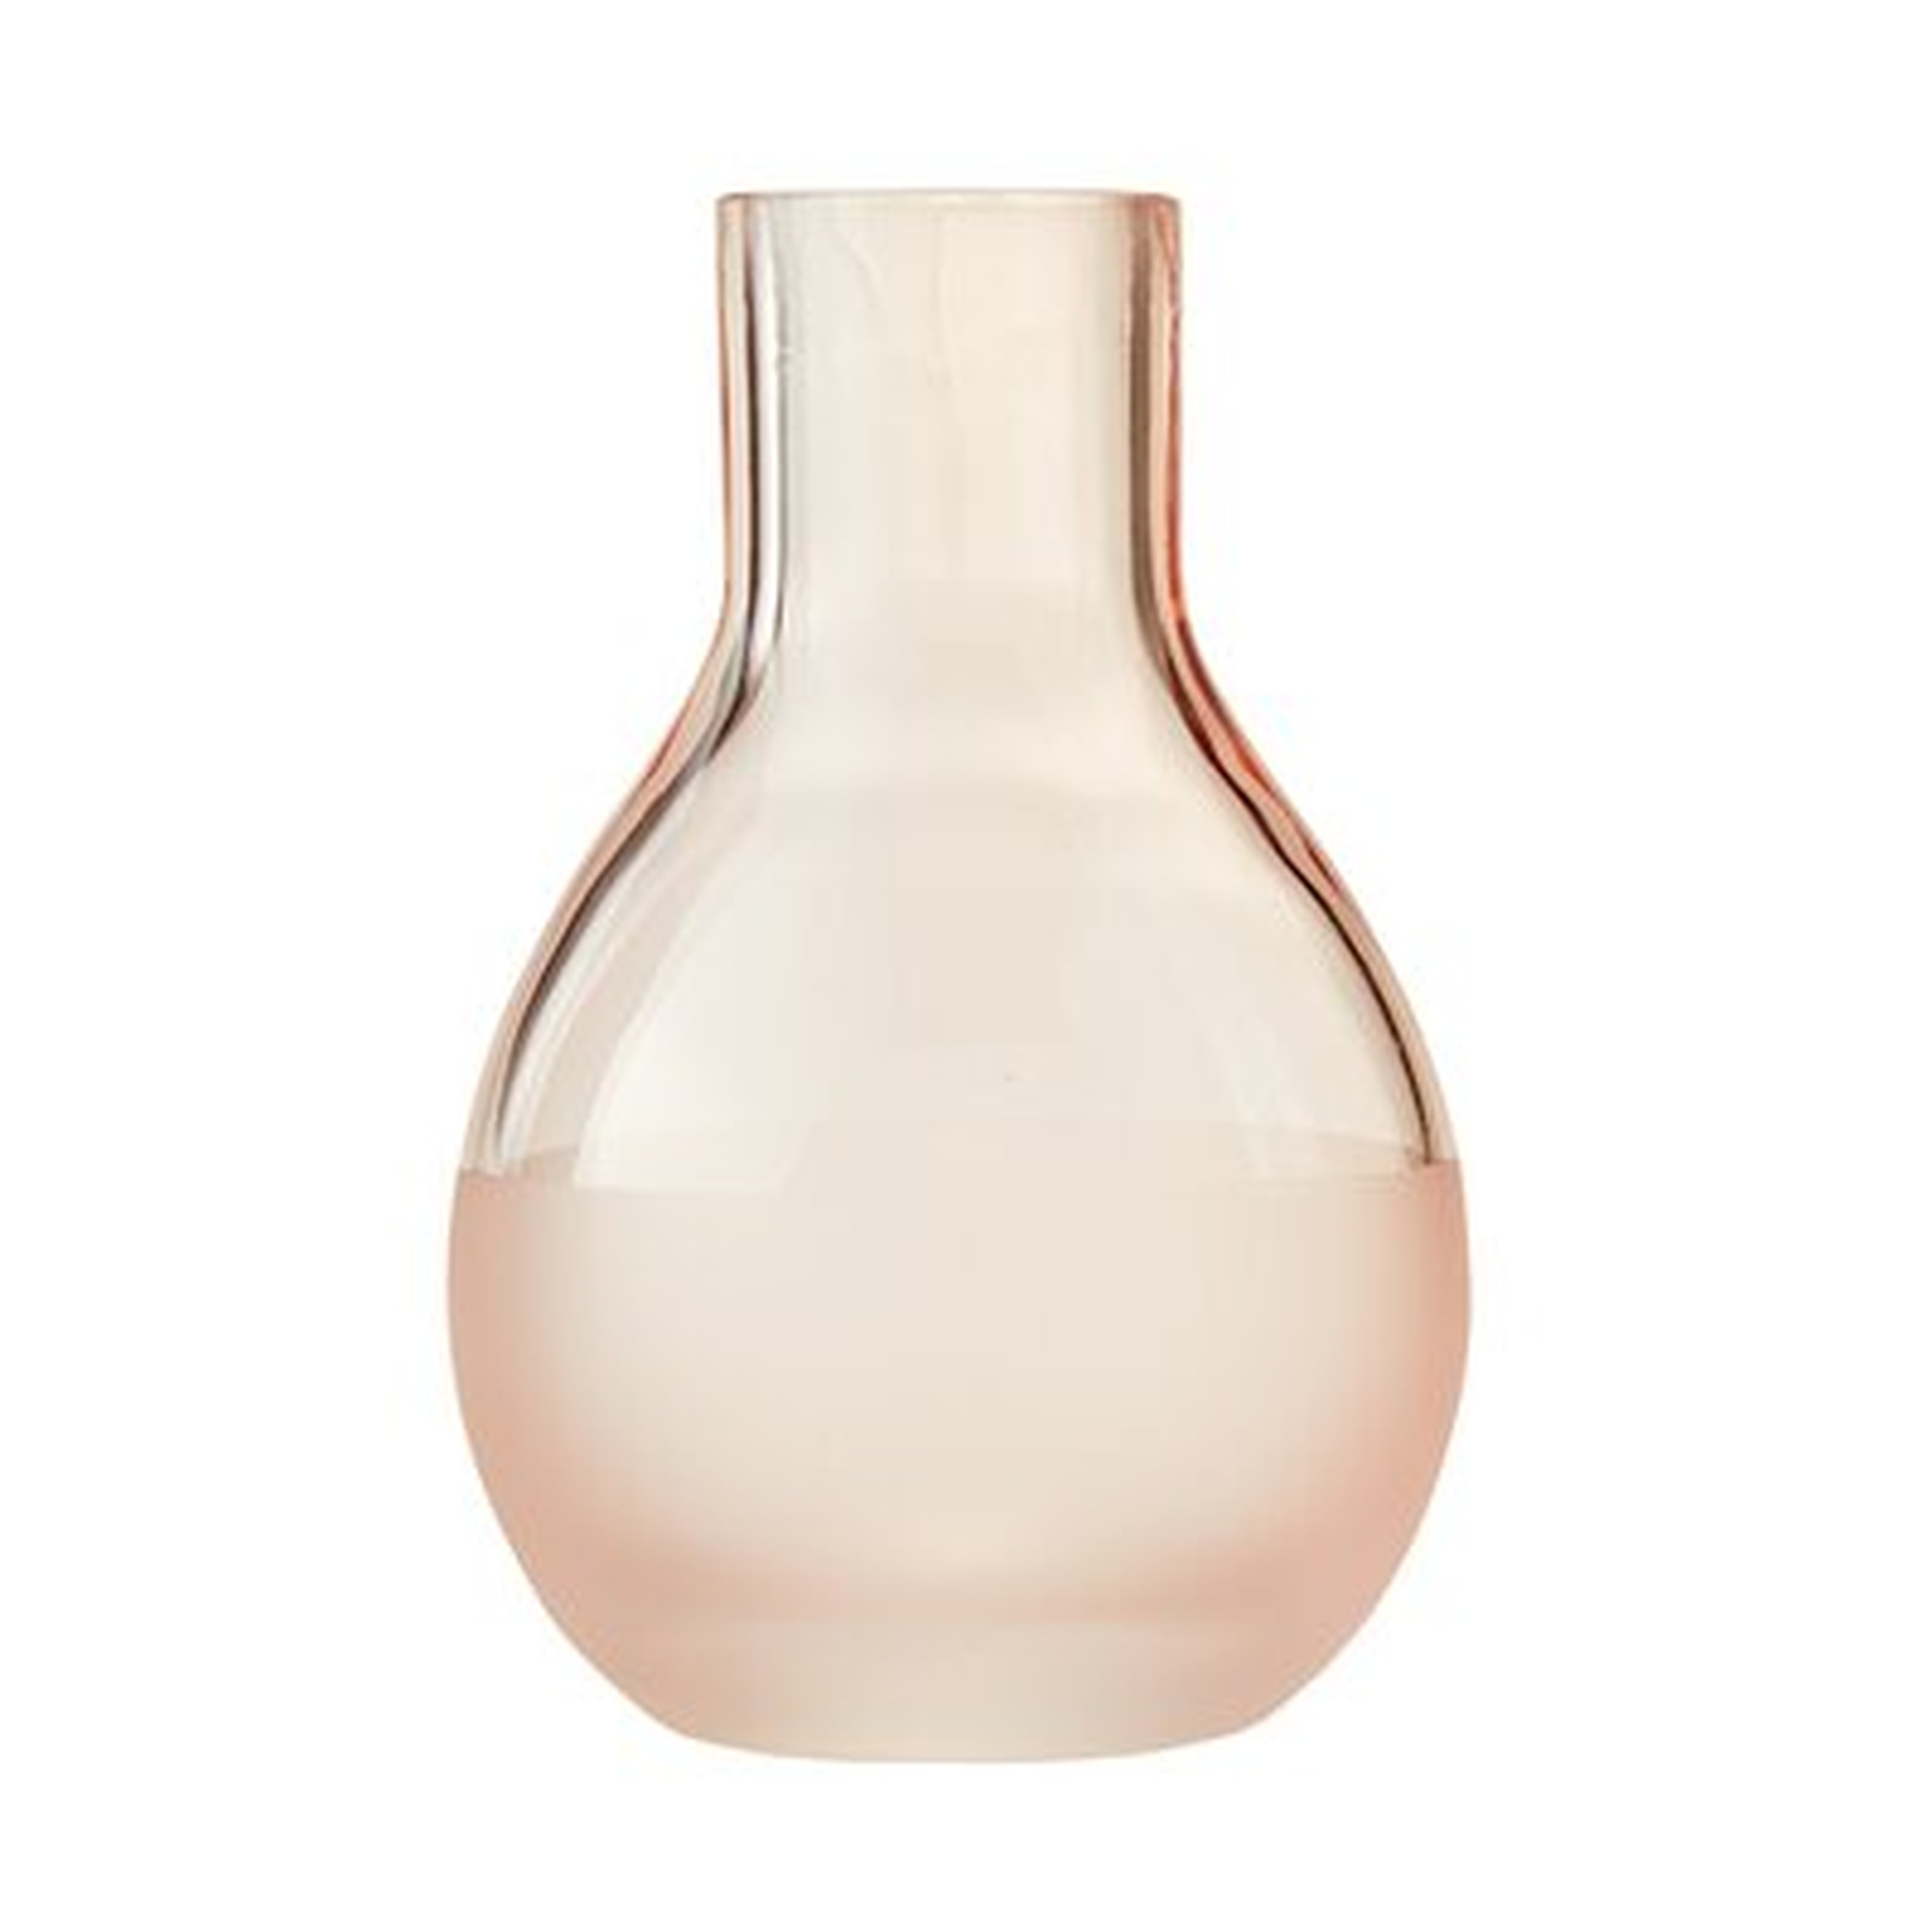 Vern Yip By Skl Home Ombre Vase In Blush - Wayfair